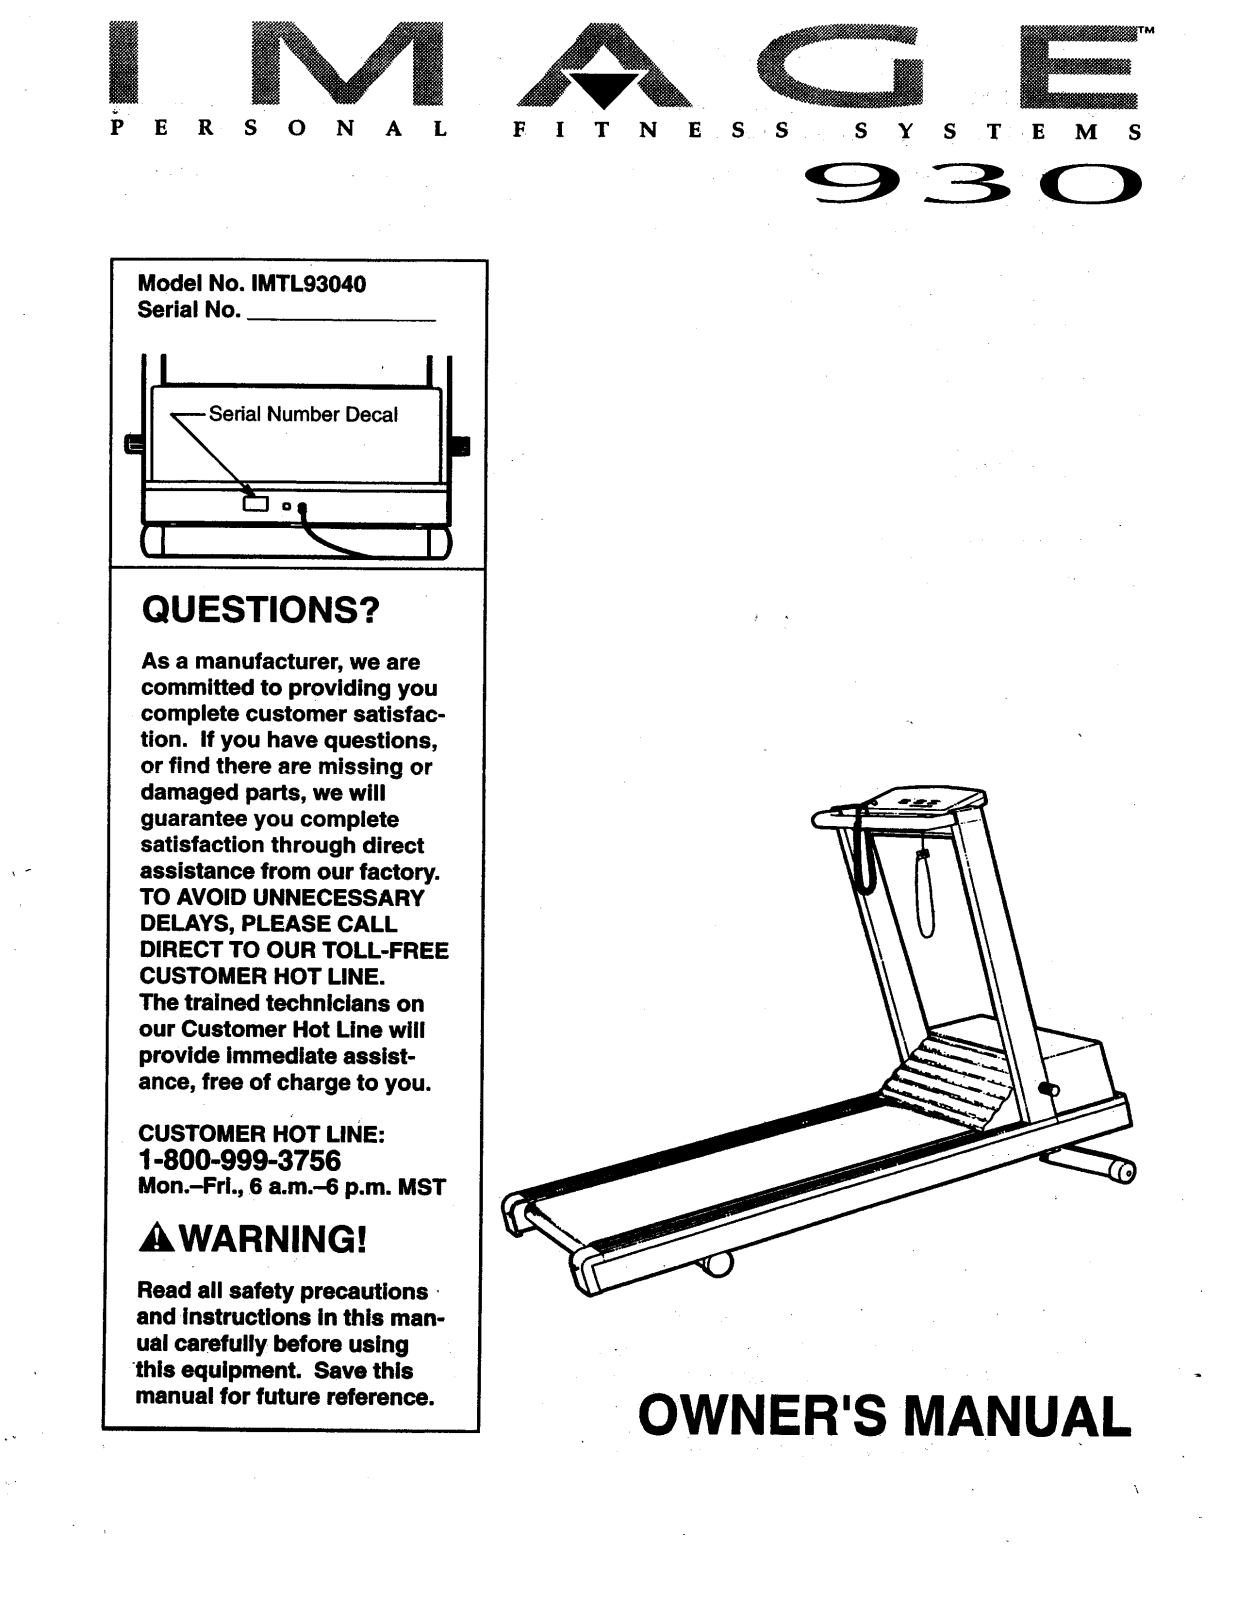 Image IMTL93040 Owner's Manual